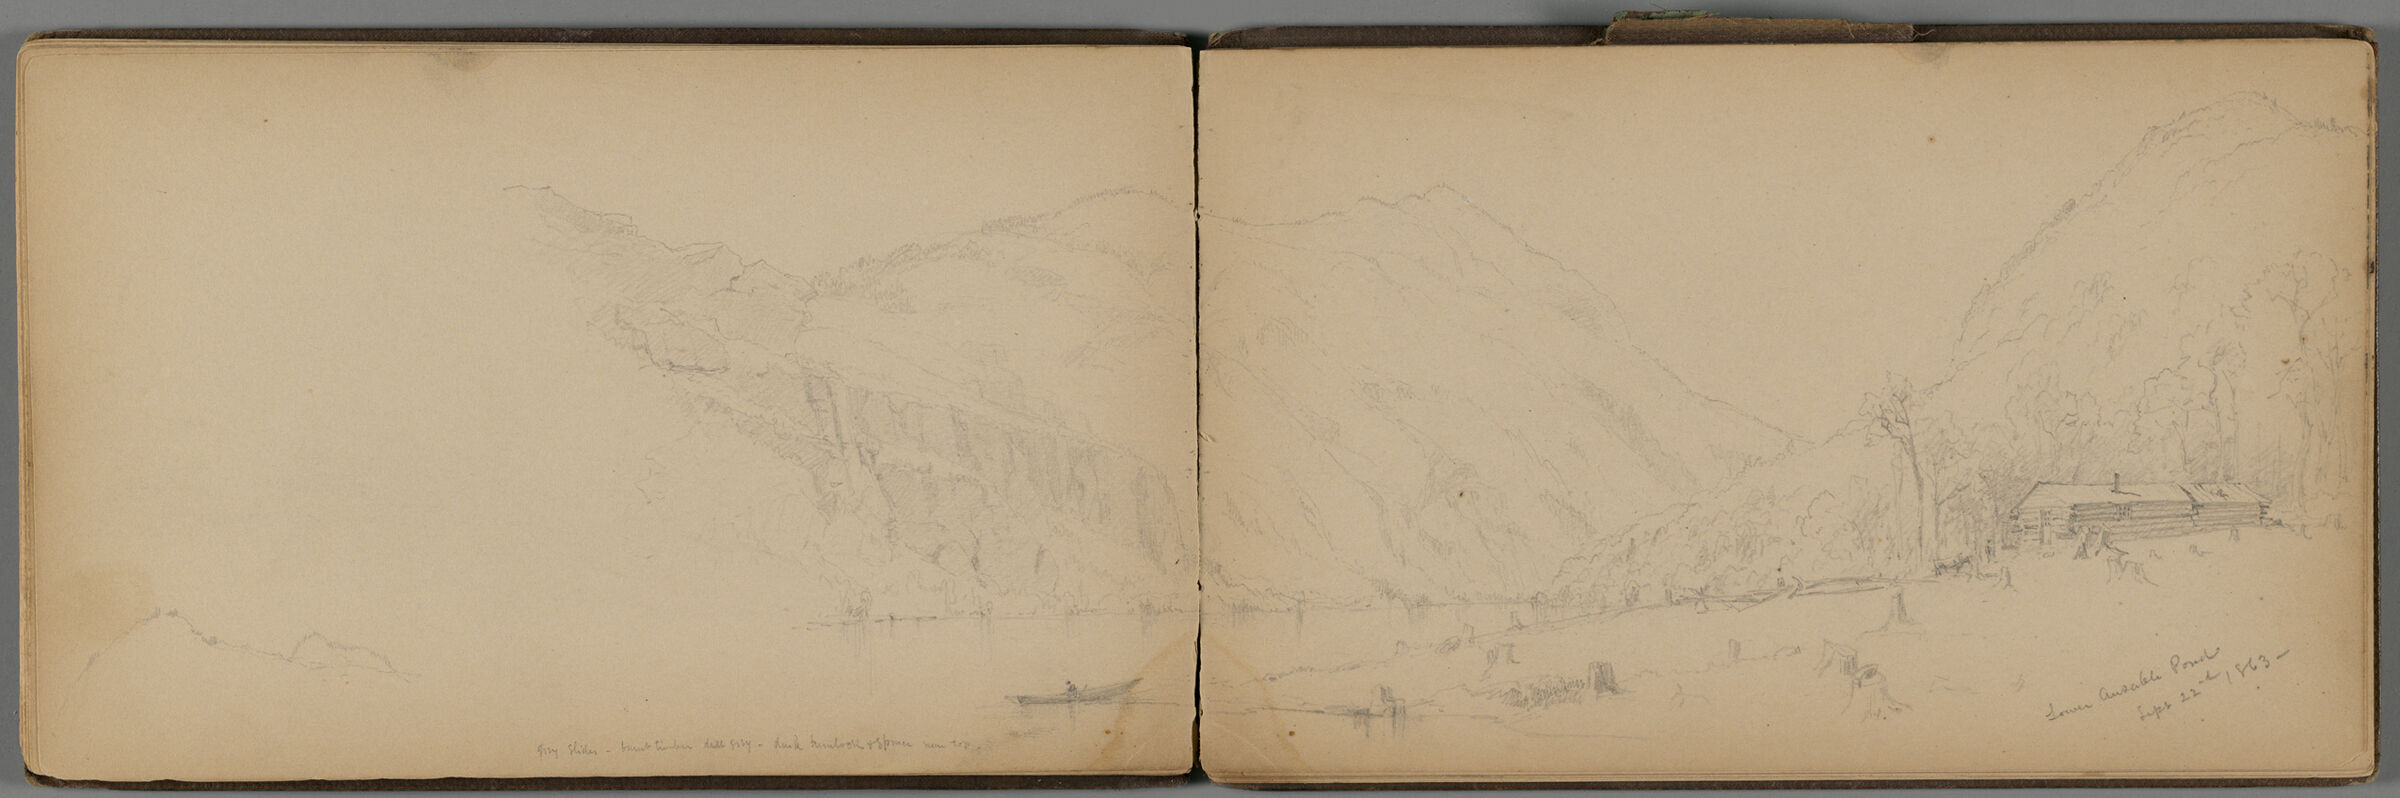 Ausable Pond Landscape With Cabin; Verso: Mt. Mcintyre From Lake Placid-Sept 27Th 1863